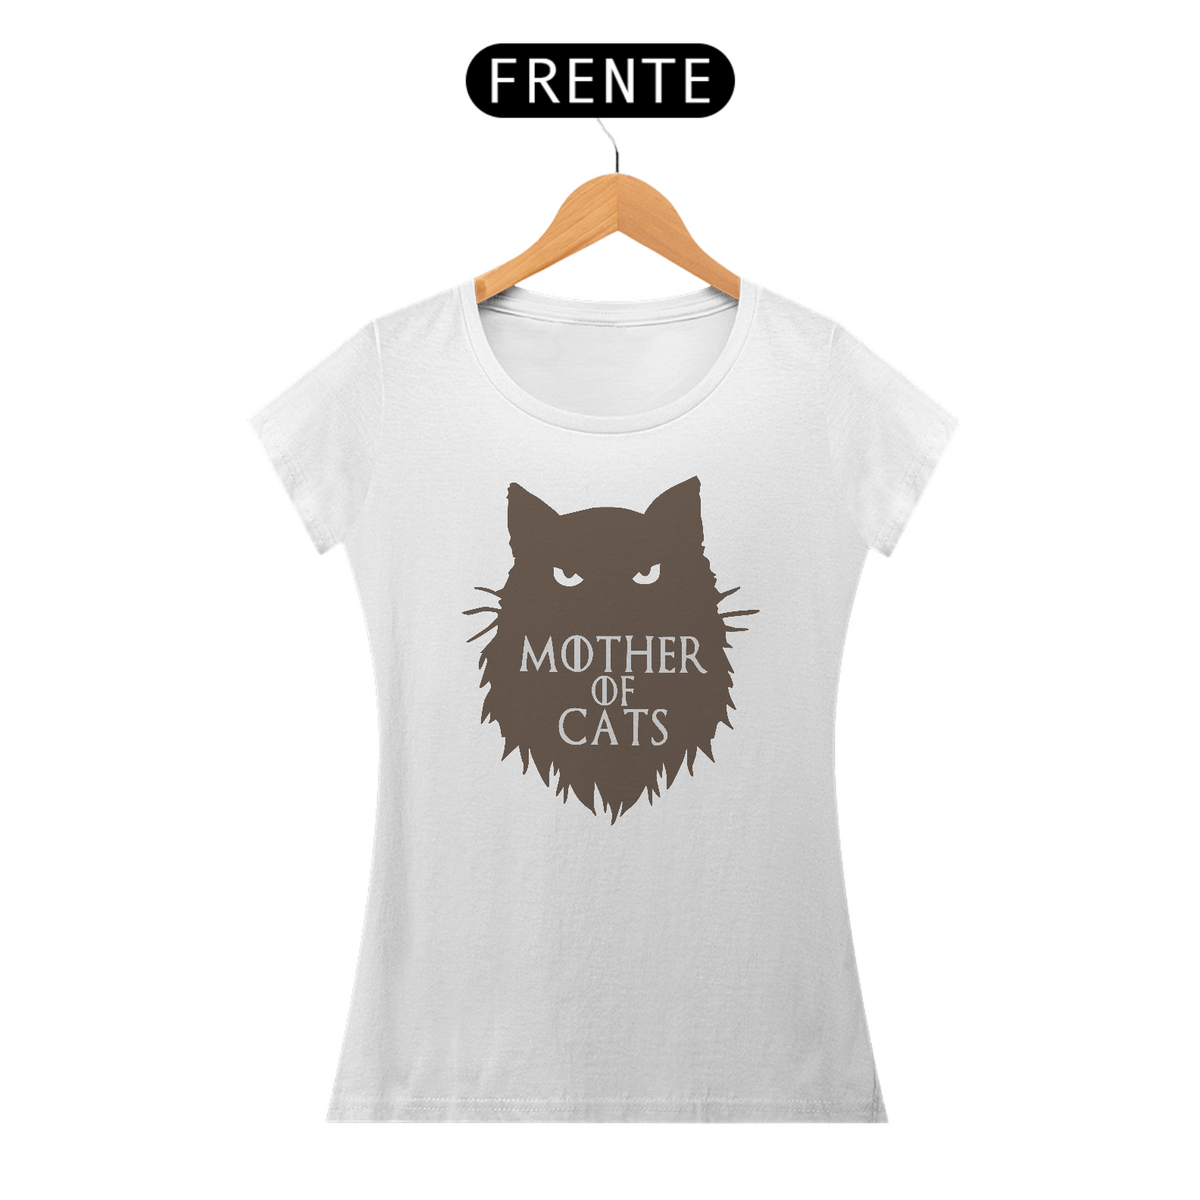 Nome do produto: Camisa Baby Long Prime Mother of Cats